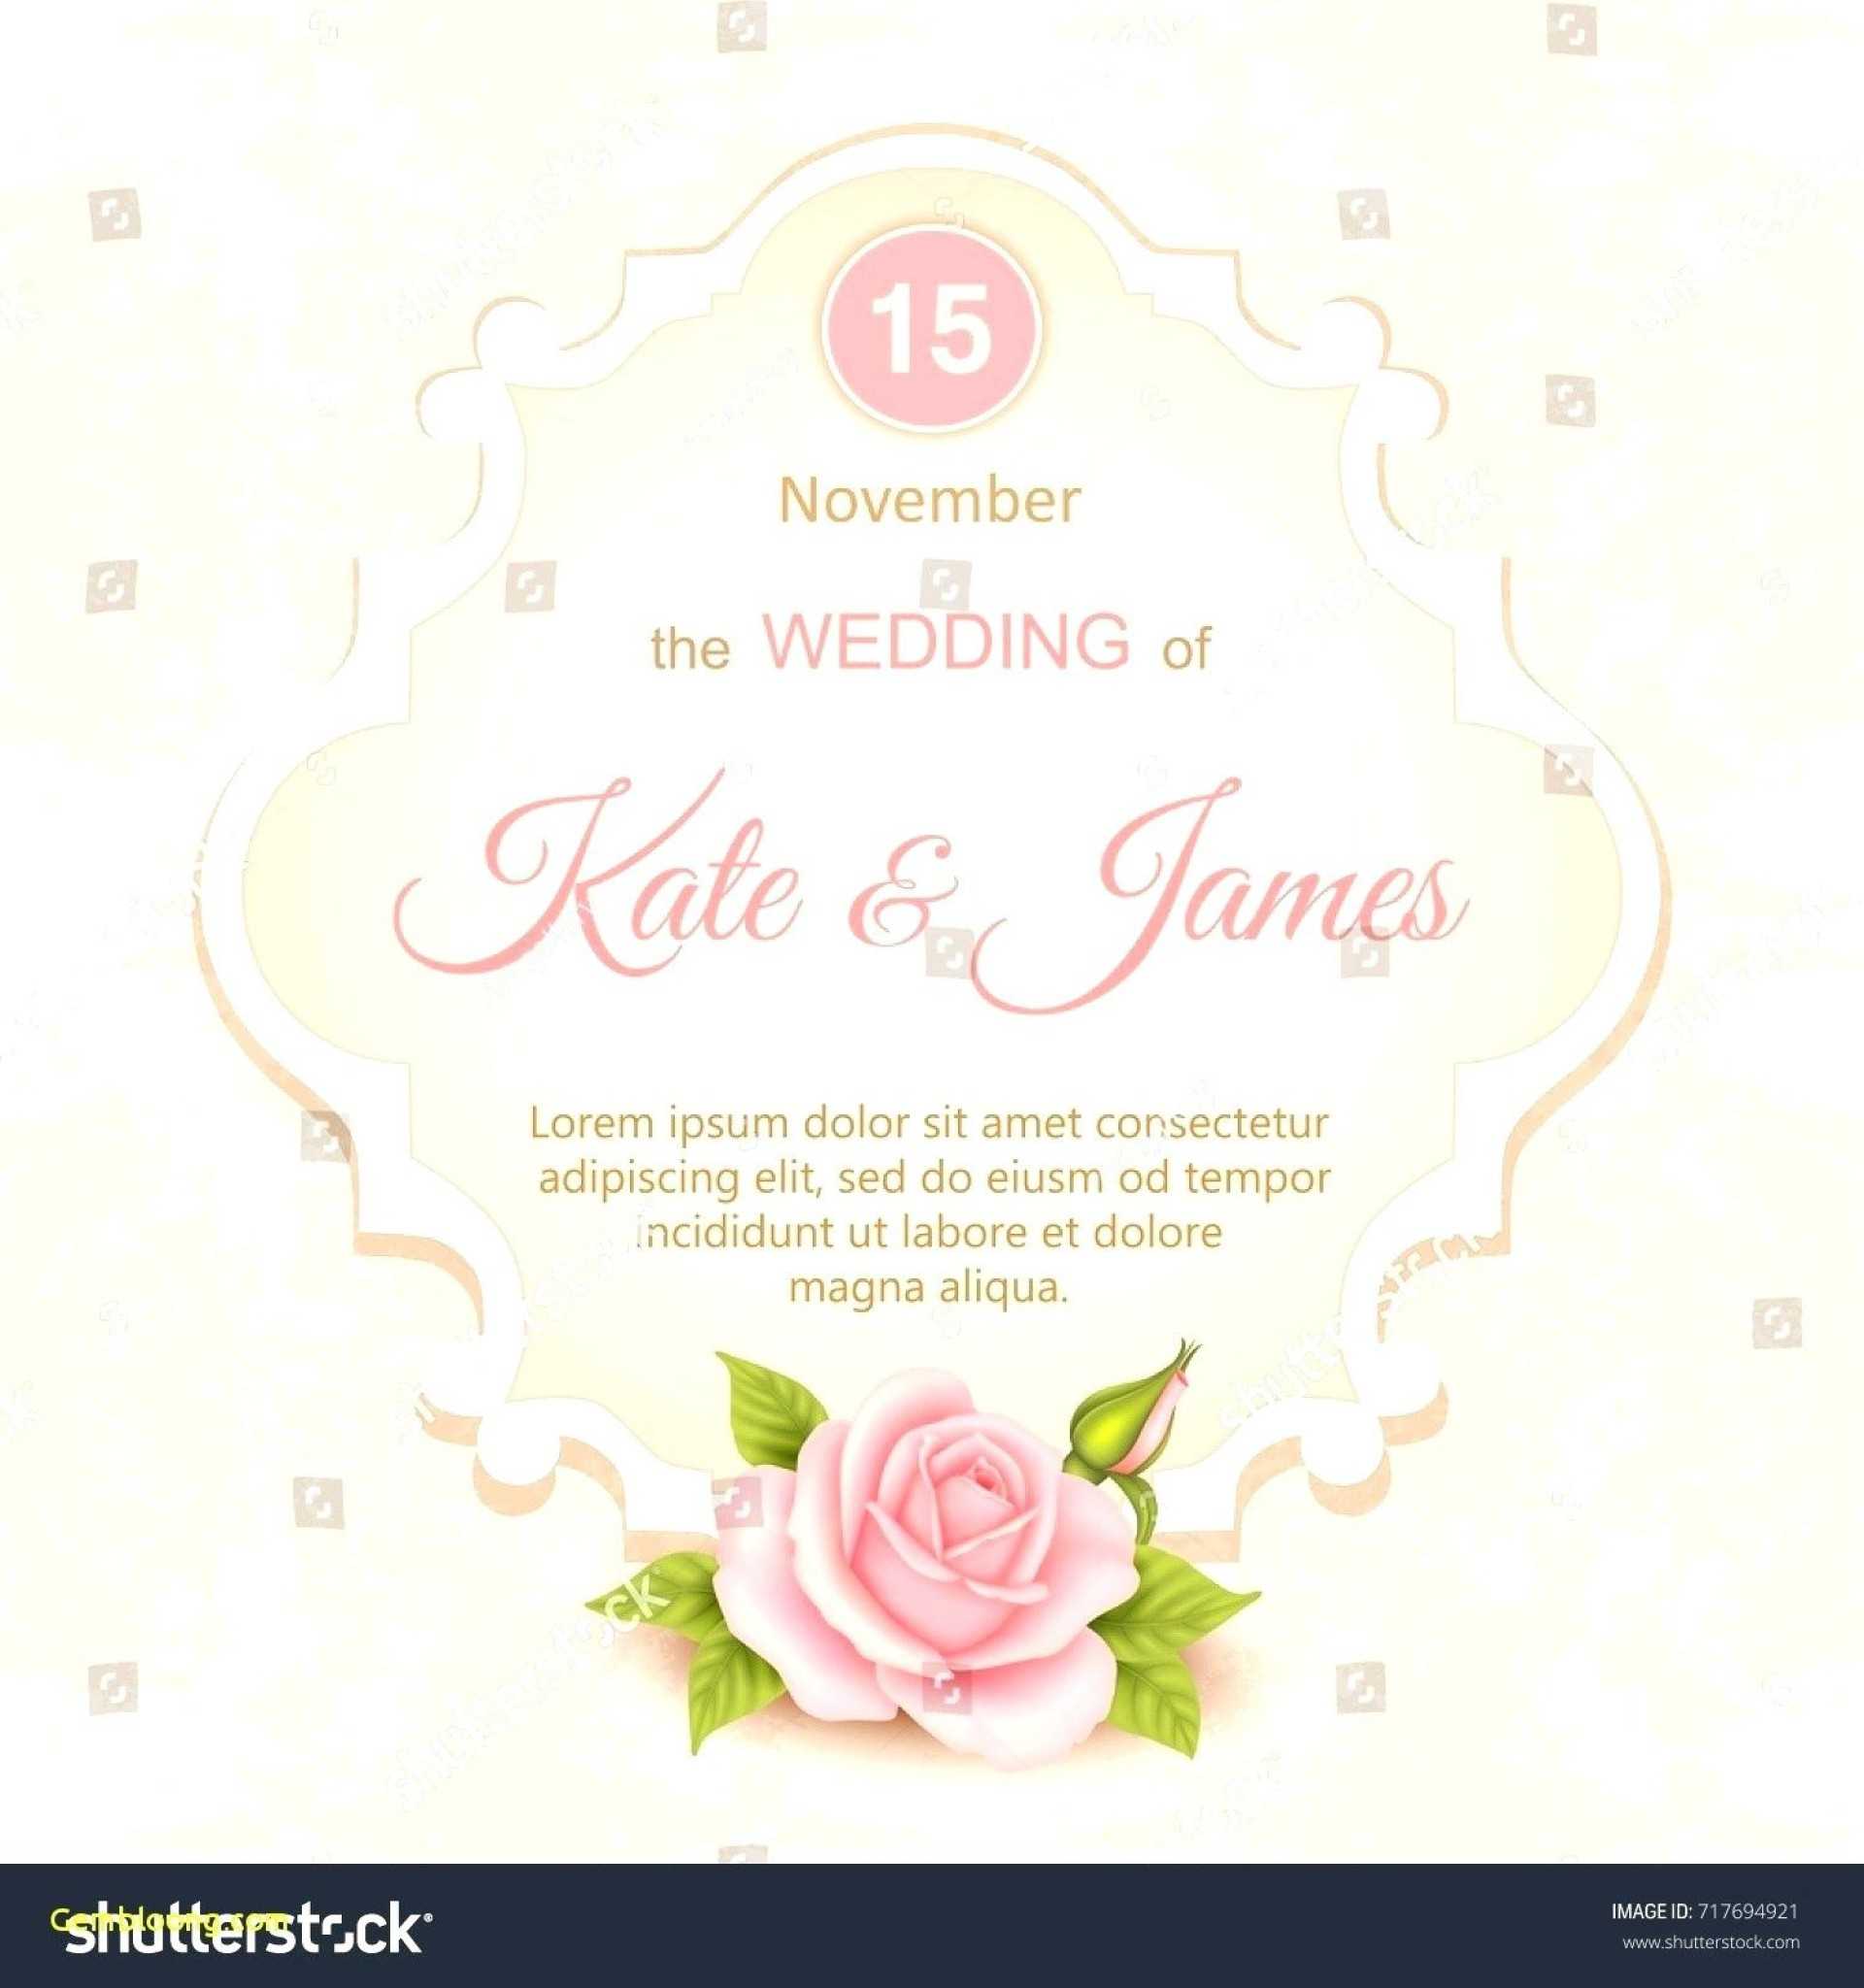 006 Vintage Save The Date Card Template Ideas Remarkable Intended For Logic Model Template Microsoft Word